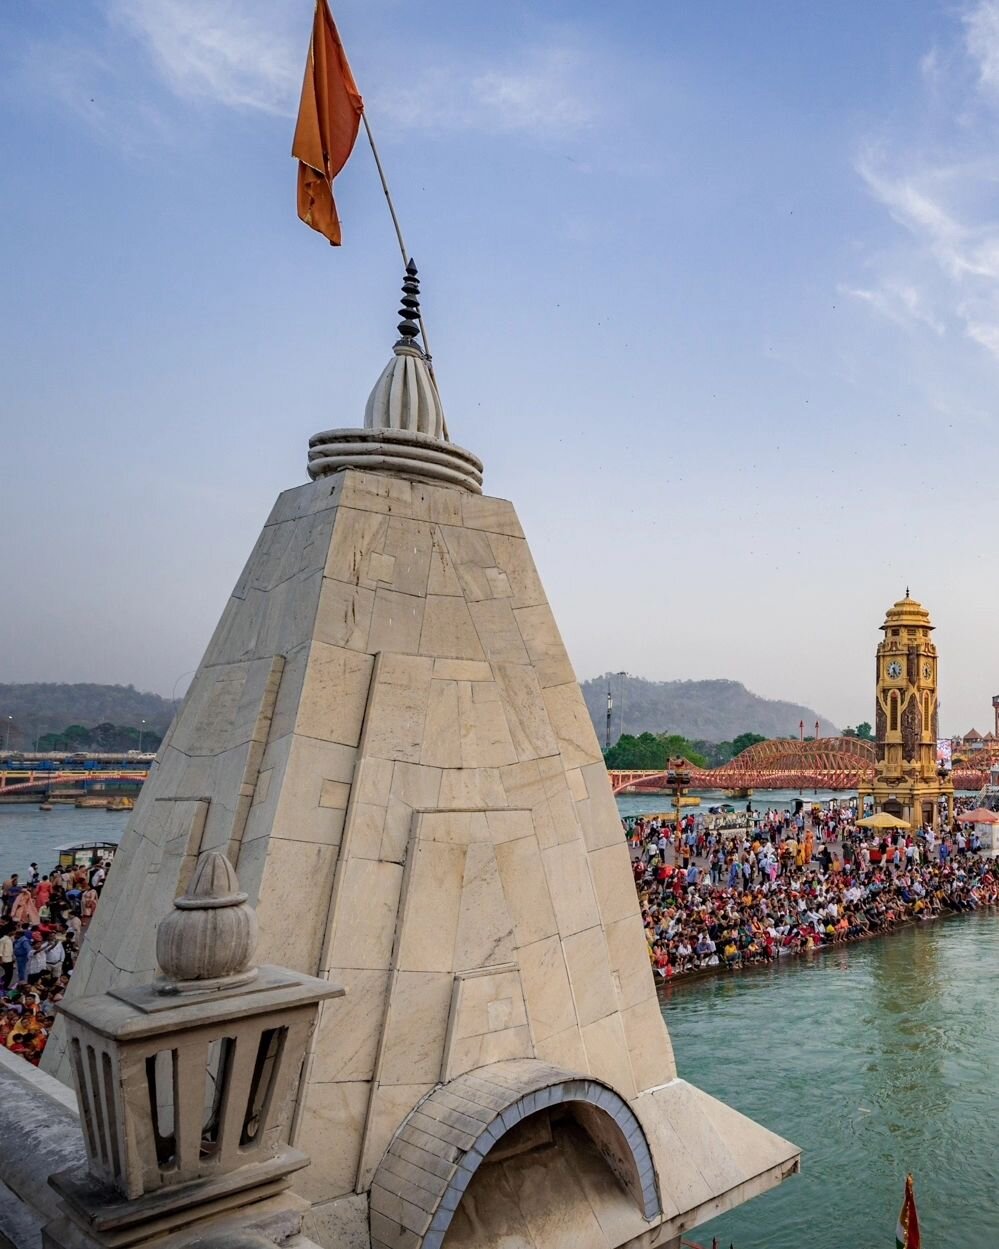 Haridwar crowds begin to form right before Ganga Aarti...

This place alongside the Ganges River amazed me. The energy, the environment, the location... all made for such a memorable experience.

What travels have left a lasting impression on you?

#